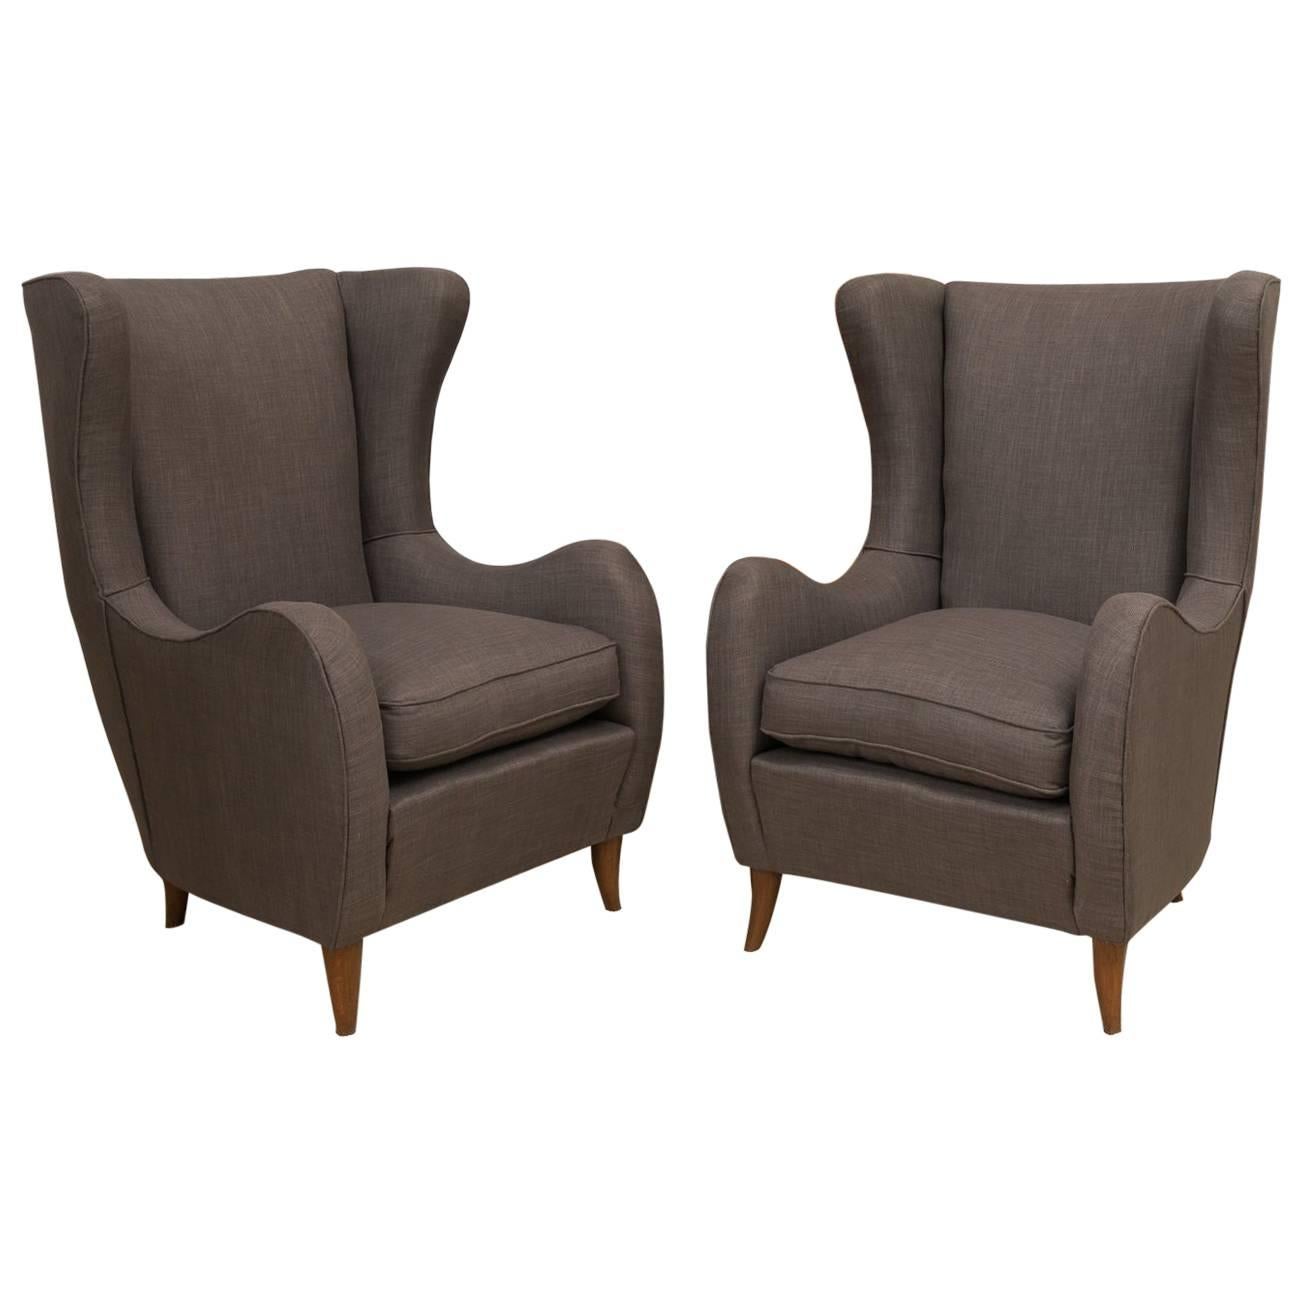 Pair of Italian Lounge Chairs For Sale